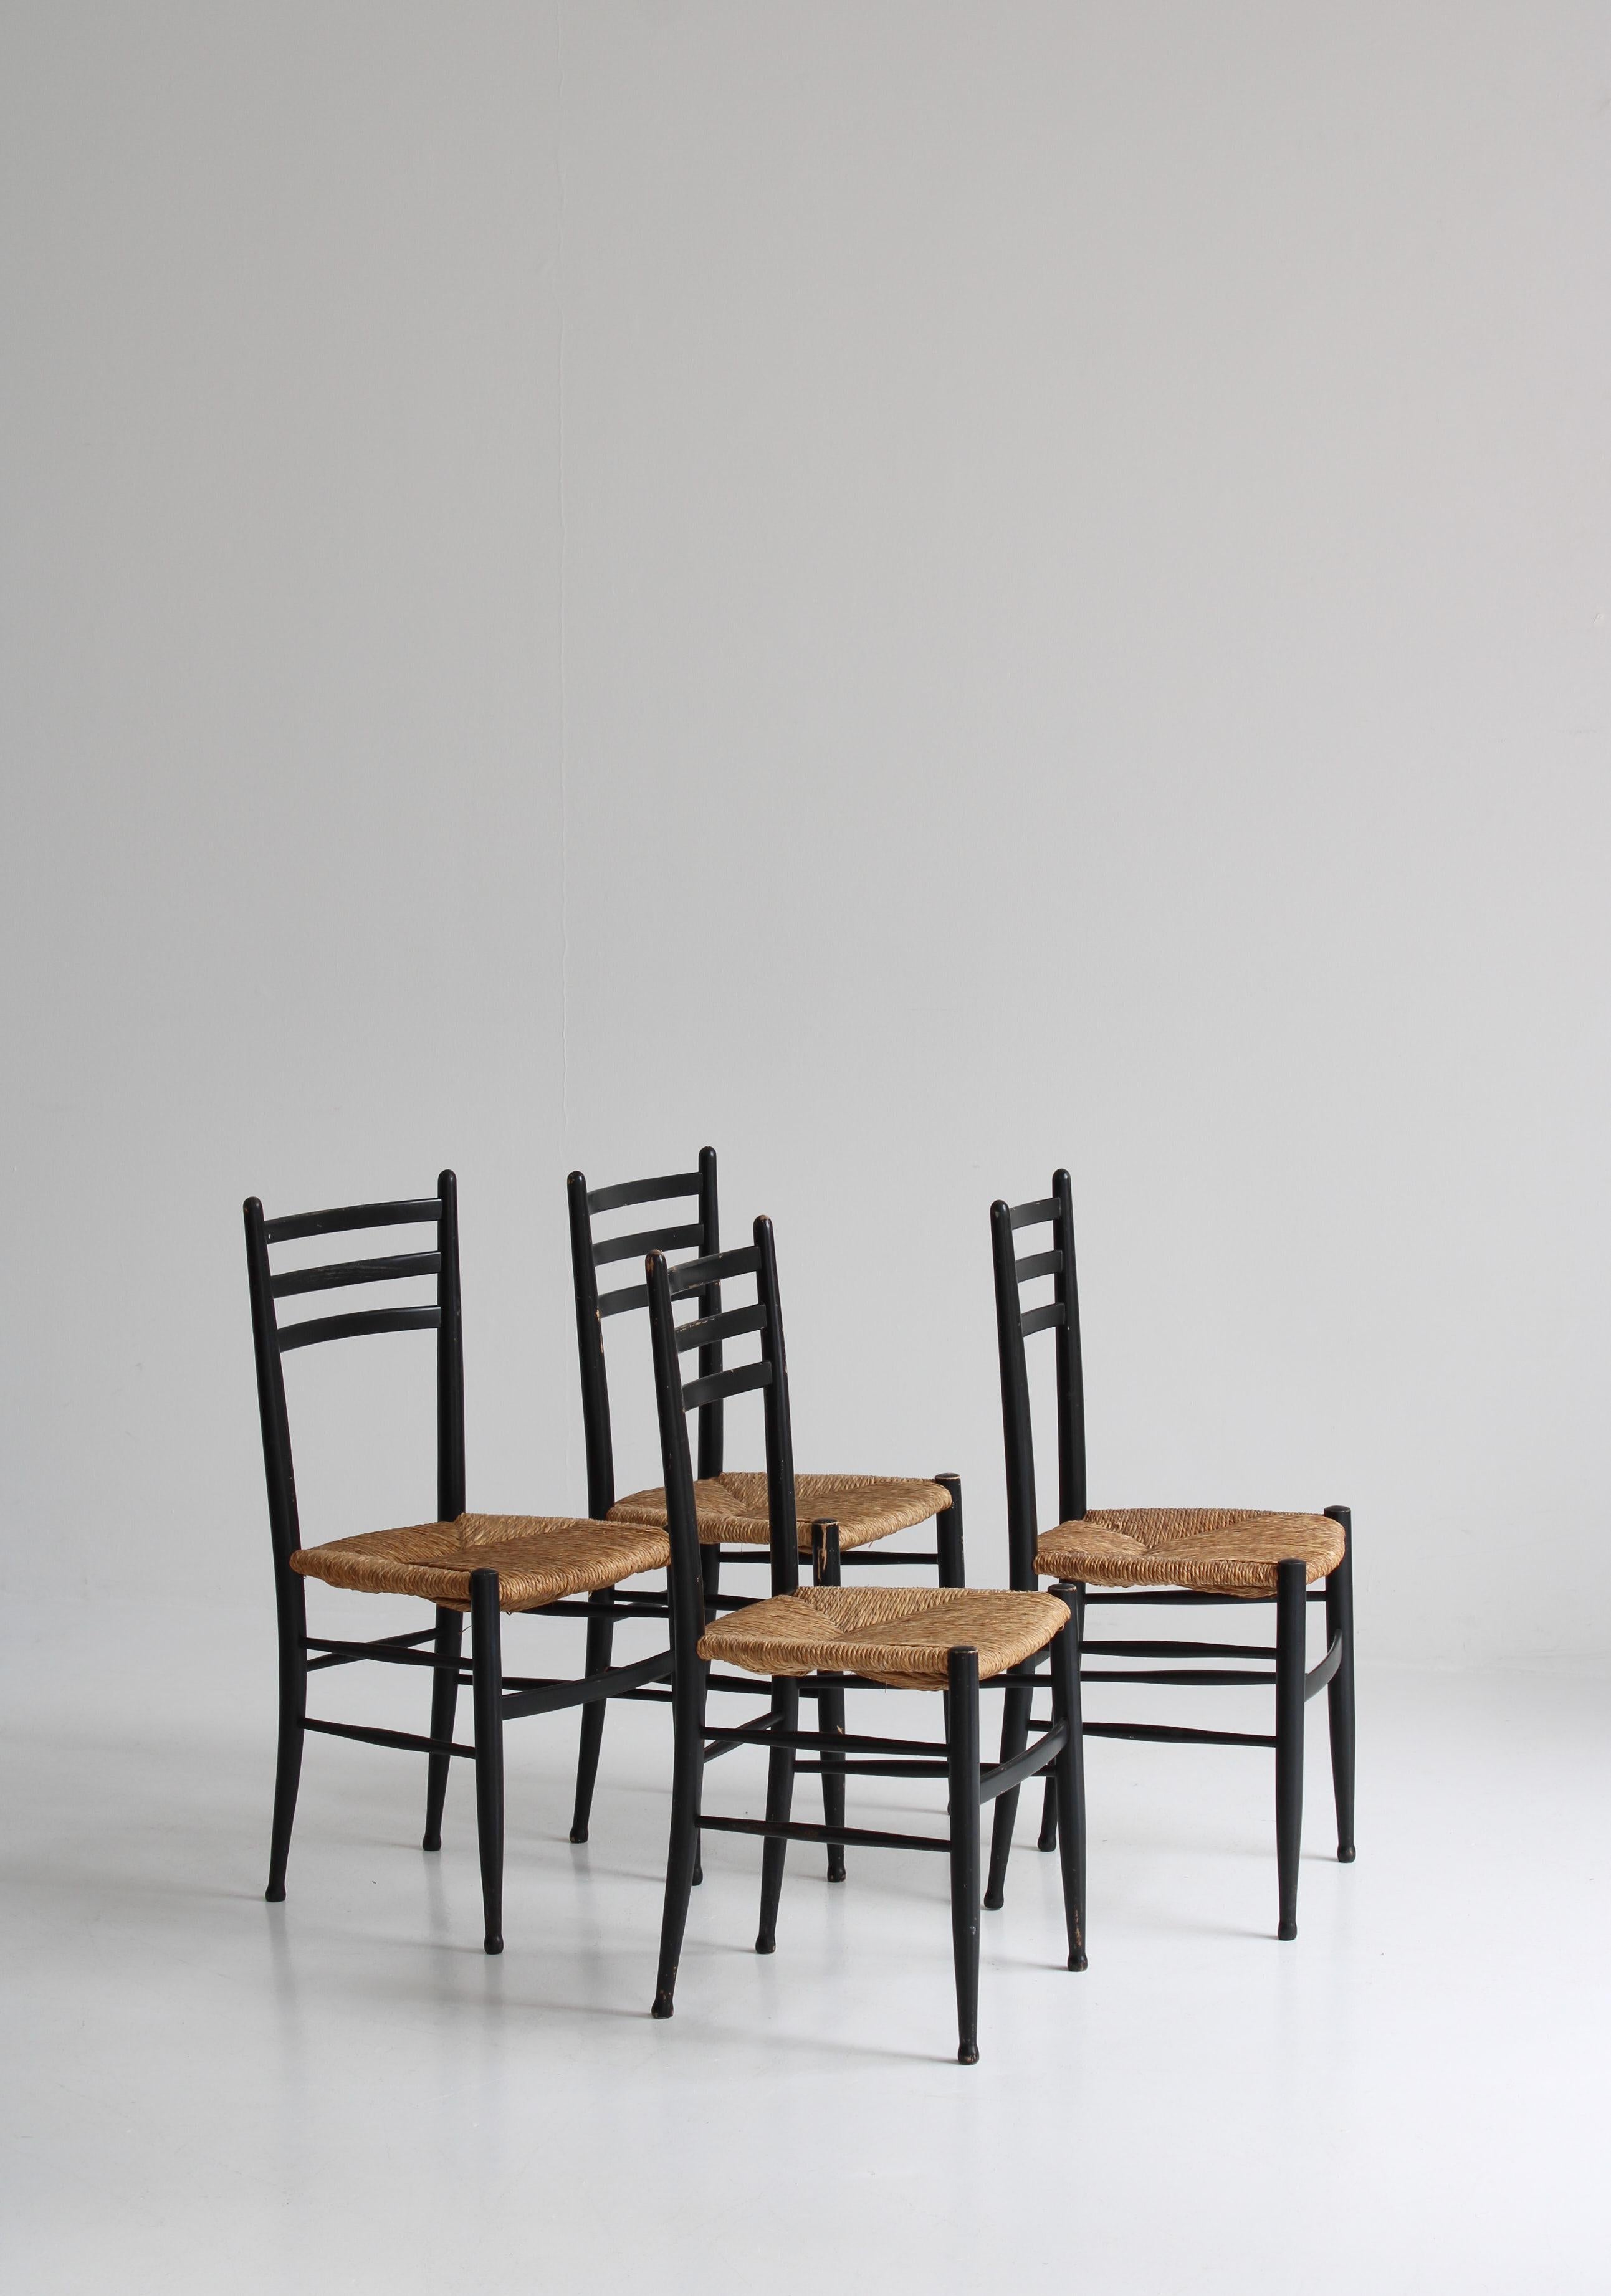 Italian Set of 4 Black Dining Chairs Woven Seagrass Chairs by Gessef, Italy, 1960s